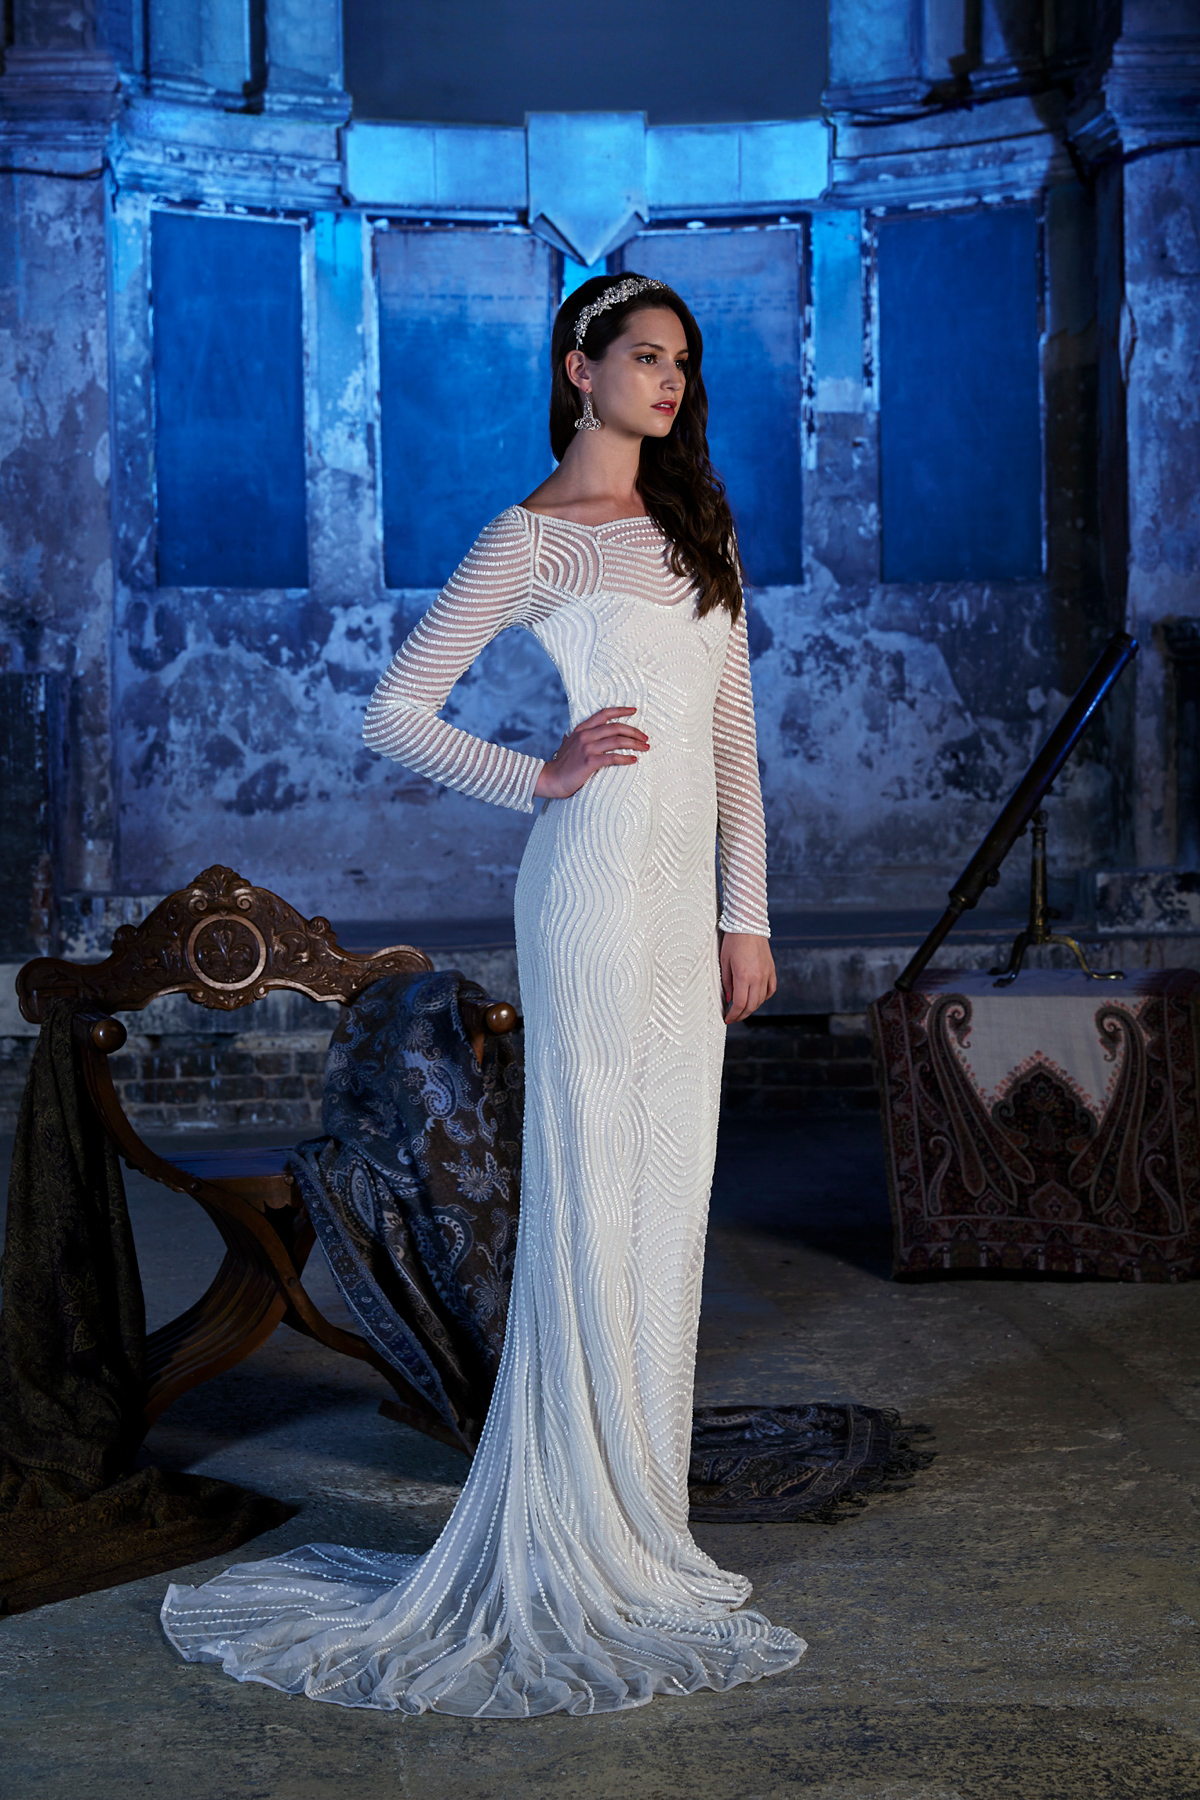 The 2017 Stardust collection by Eliza Jane Howell - 1920's inspired wedding dresses and bridal fashion.